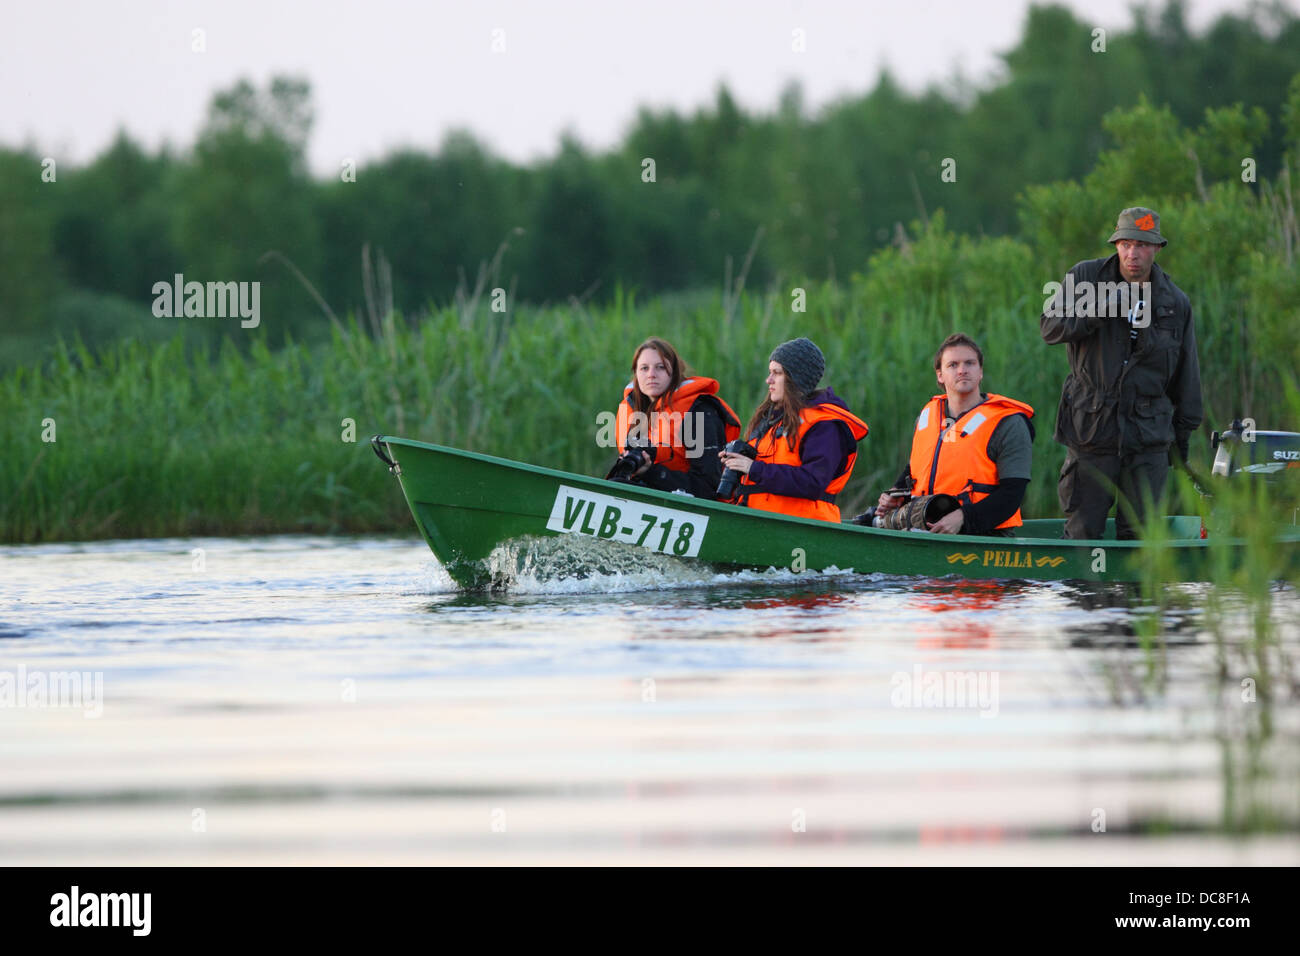 Group of wildlife photographers taking a boat ride, looking for beavers. Europe, Estonia, Alam-Pedja Nature Reserve. Stock Photo